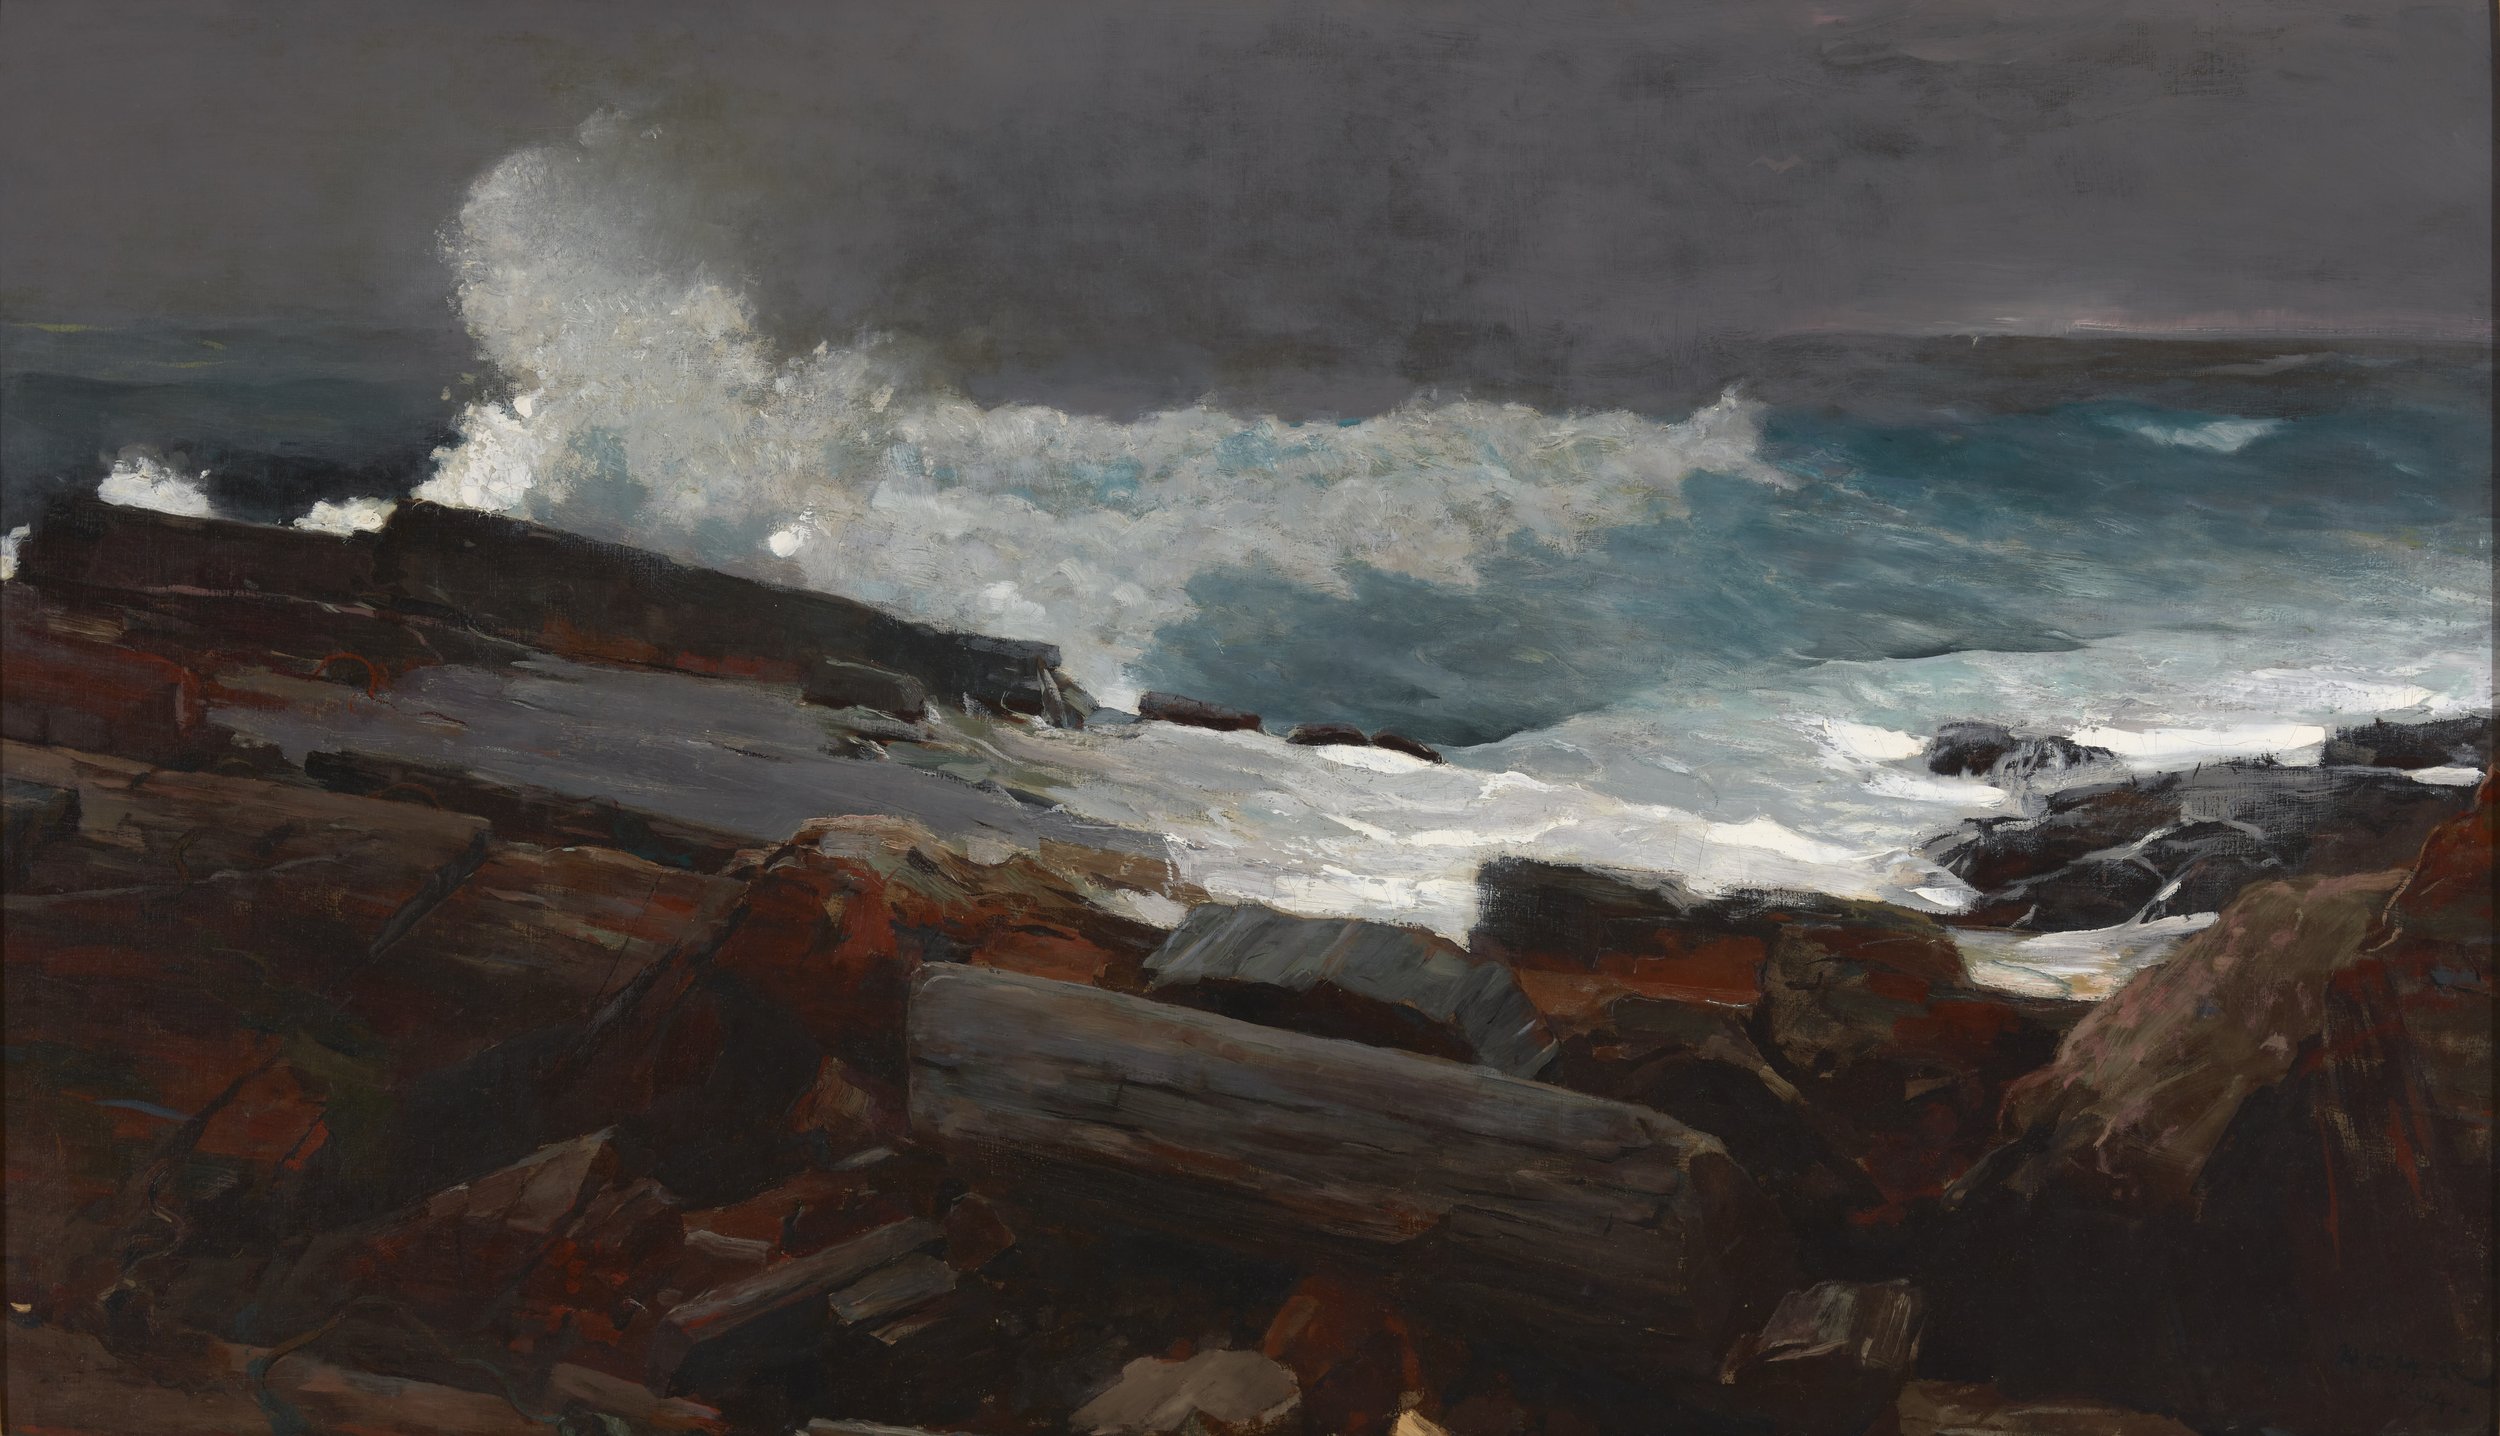  Winslow Homer (United States, 1836–1910),  Weatherbeaten , 1894, oil on canvas, 28 1/2 x 48 3/8 inches. Portland Museum of Art, Maine. Bequest of Charles Shipman Payson, 1988.55.1. Image courtesy Meyersphoto.com 